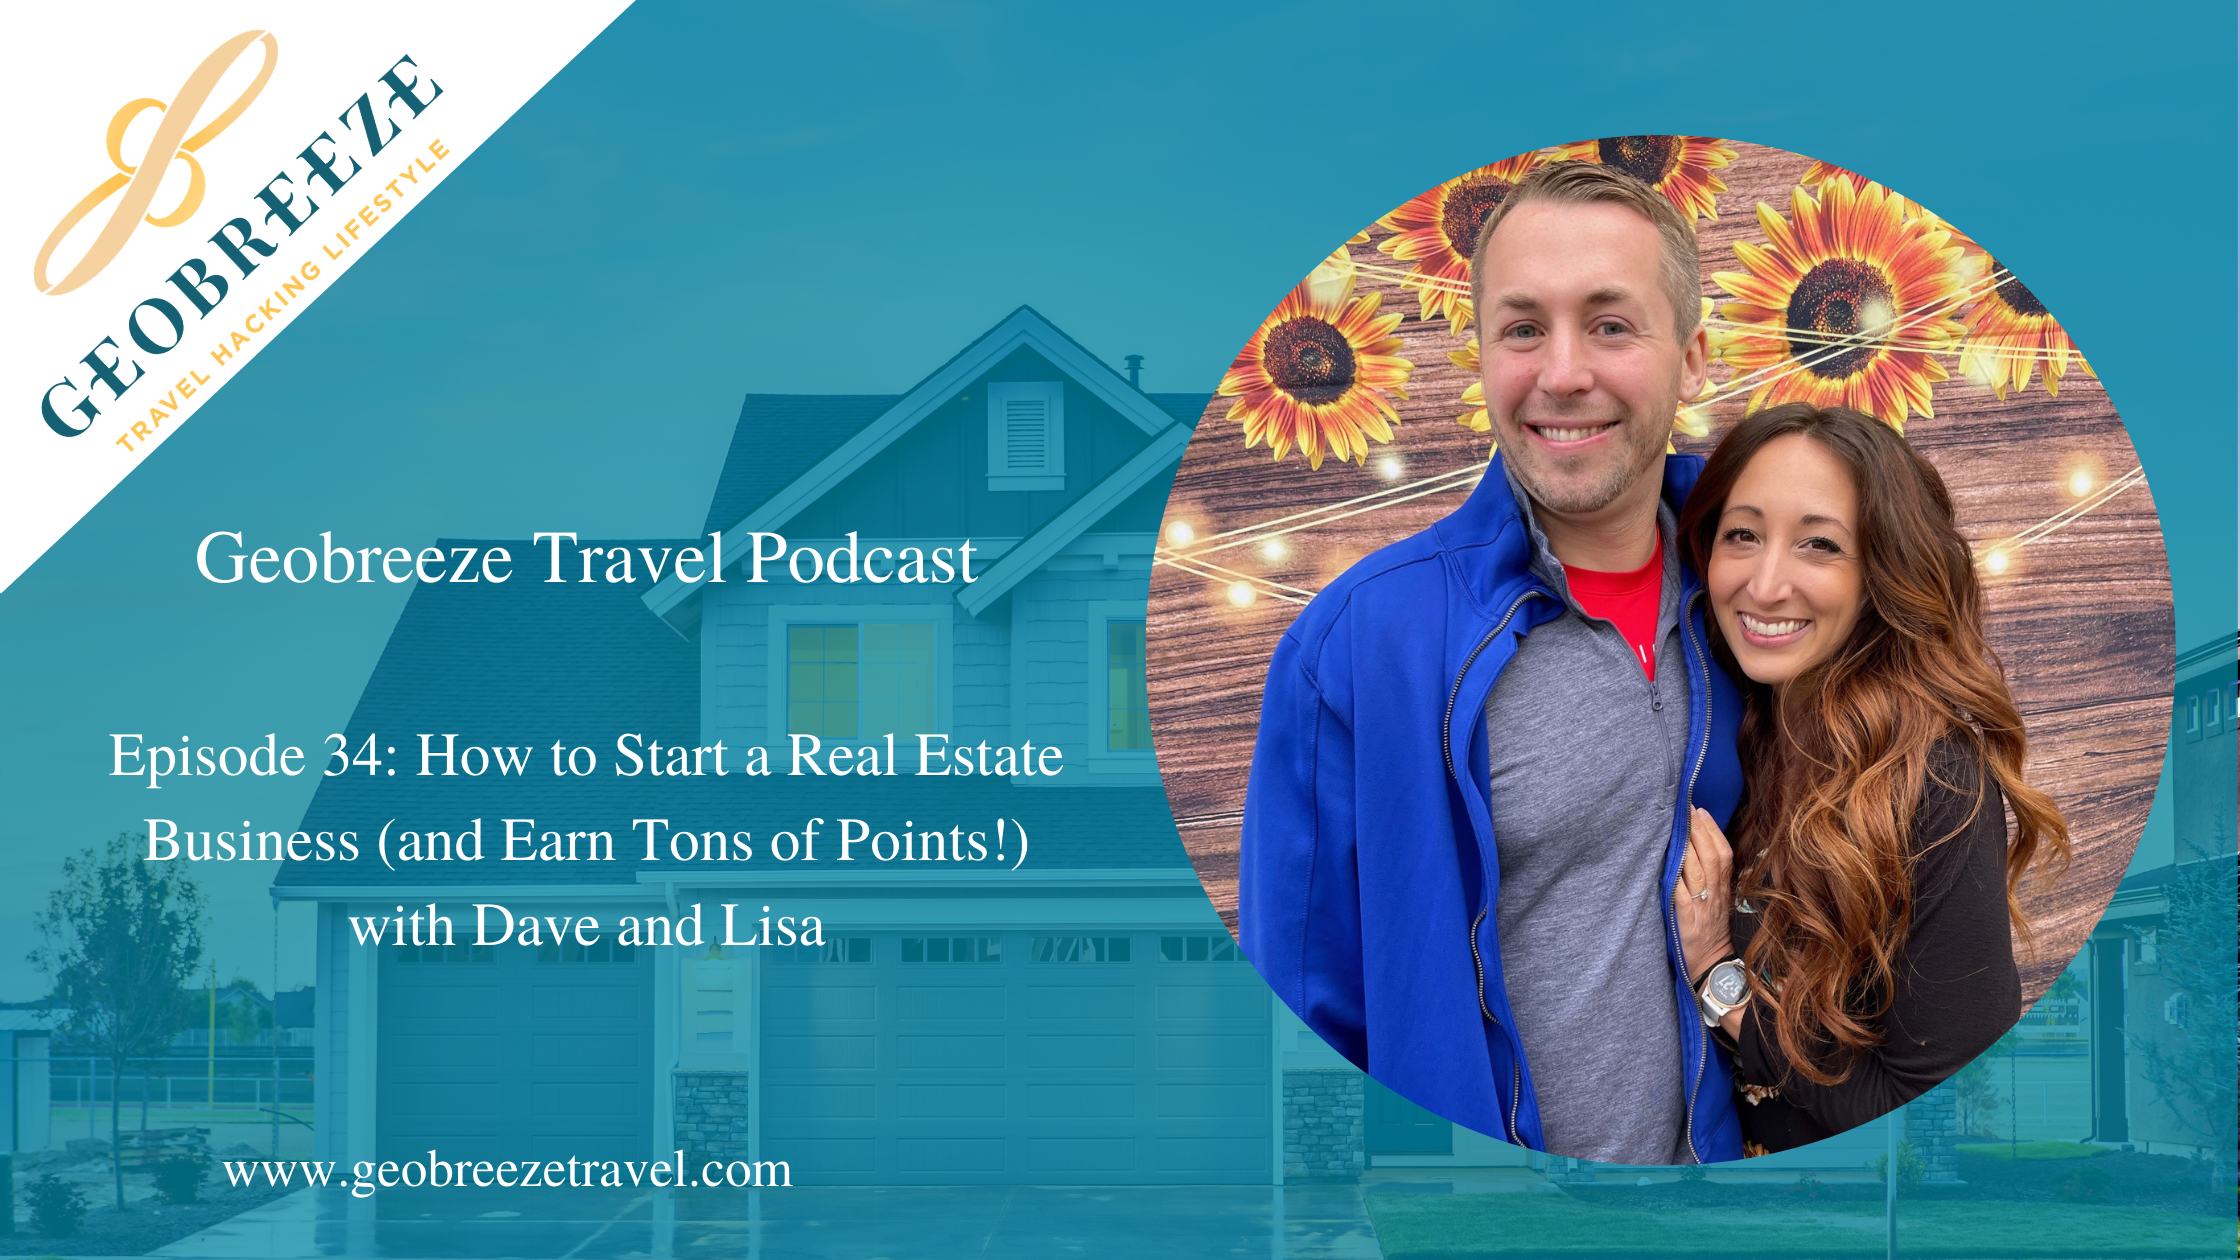 Episode 34: How to Start a Real Estate Business (and Earn Tons of Points!) with Dave and Lisa